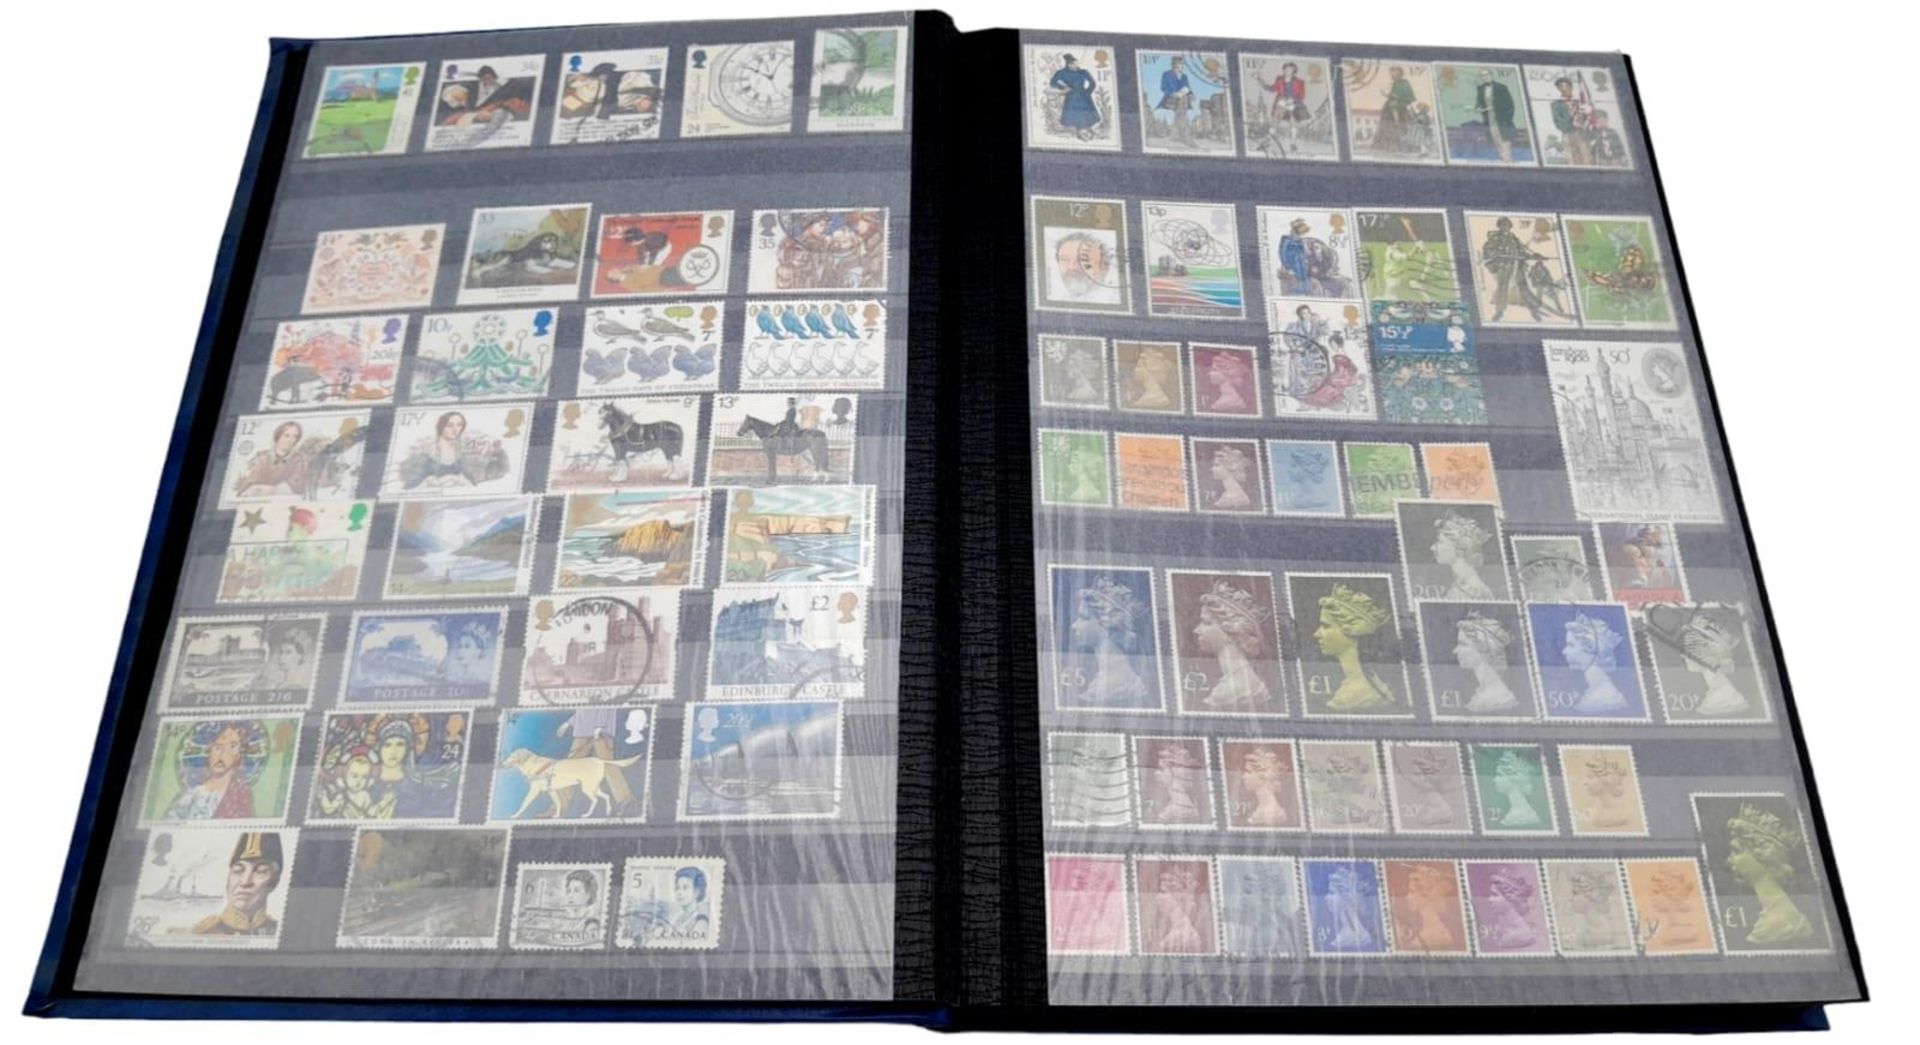 An Eclectic Stamp Book/Collection. Please see photos for finer details.